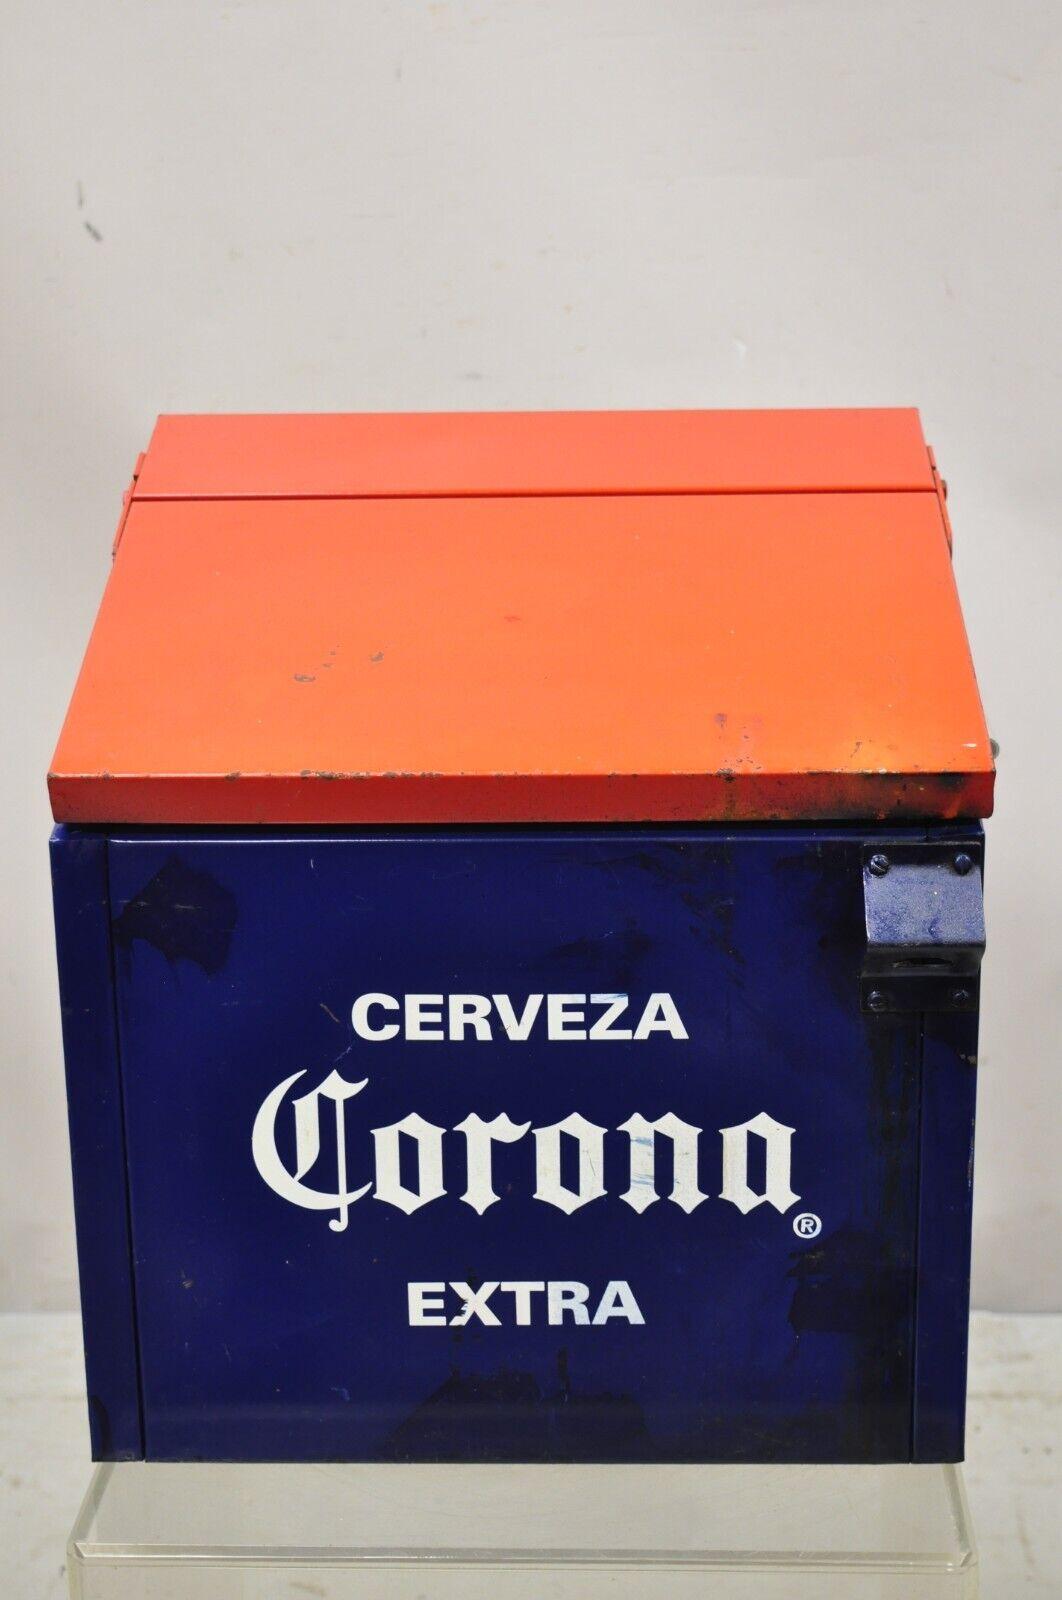 Corona Extra Cerveza Beer Steel Metal Beverage Cooler Vintage Style. Item featured is of the 21st century, pre-owned.
Measurements: 17.5